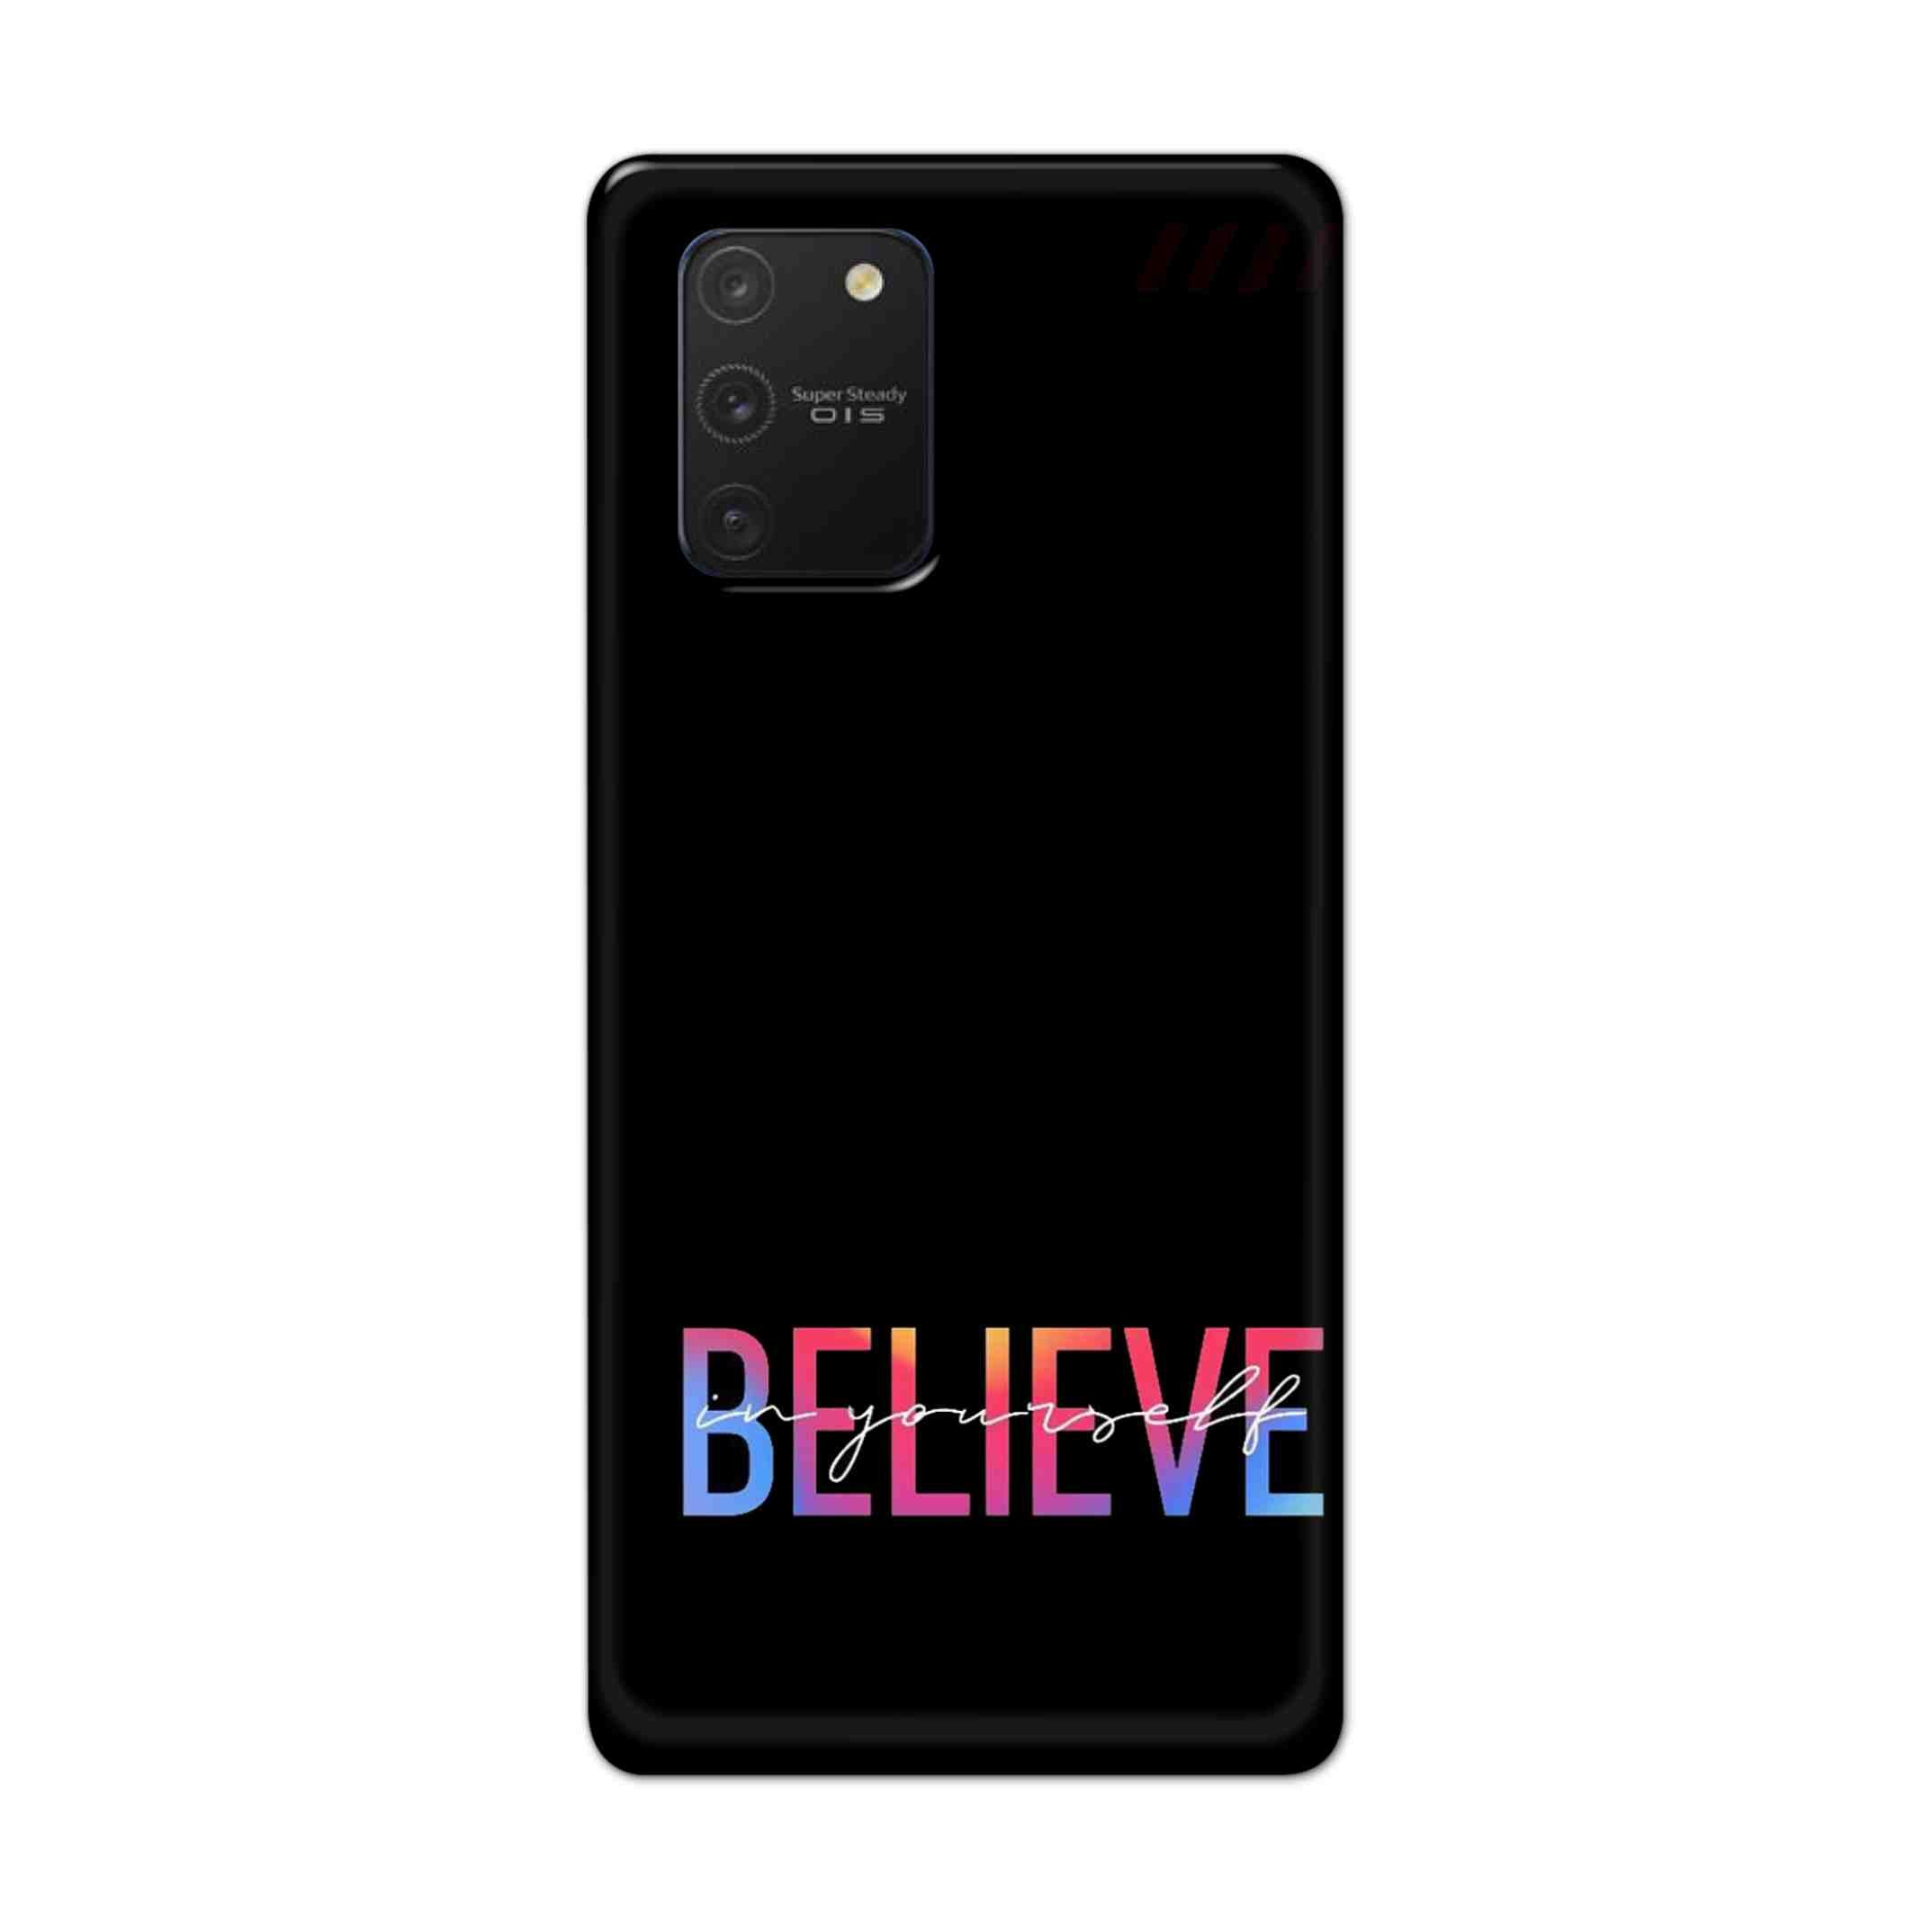 Buy Believe Hard Back Mobile Phone Case Cover For Samsung Galaxy S10 Lite Online